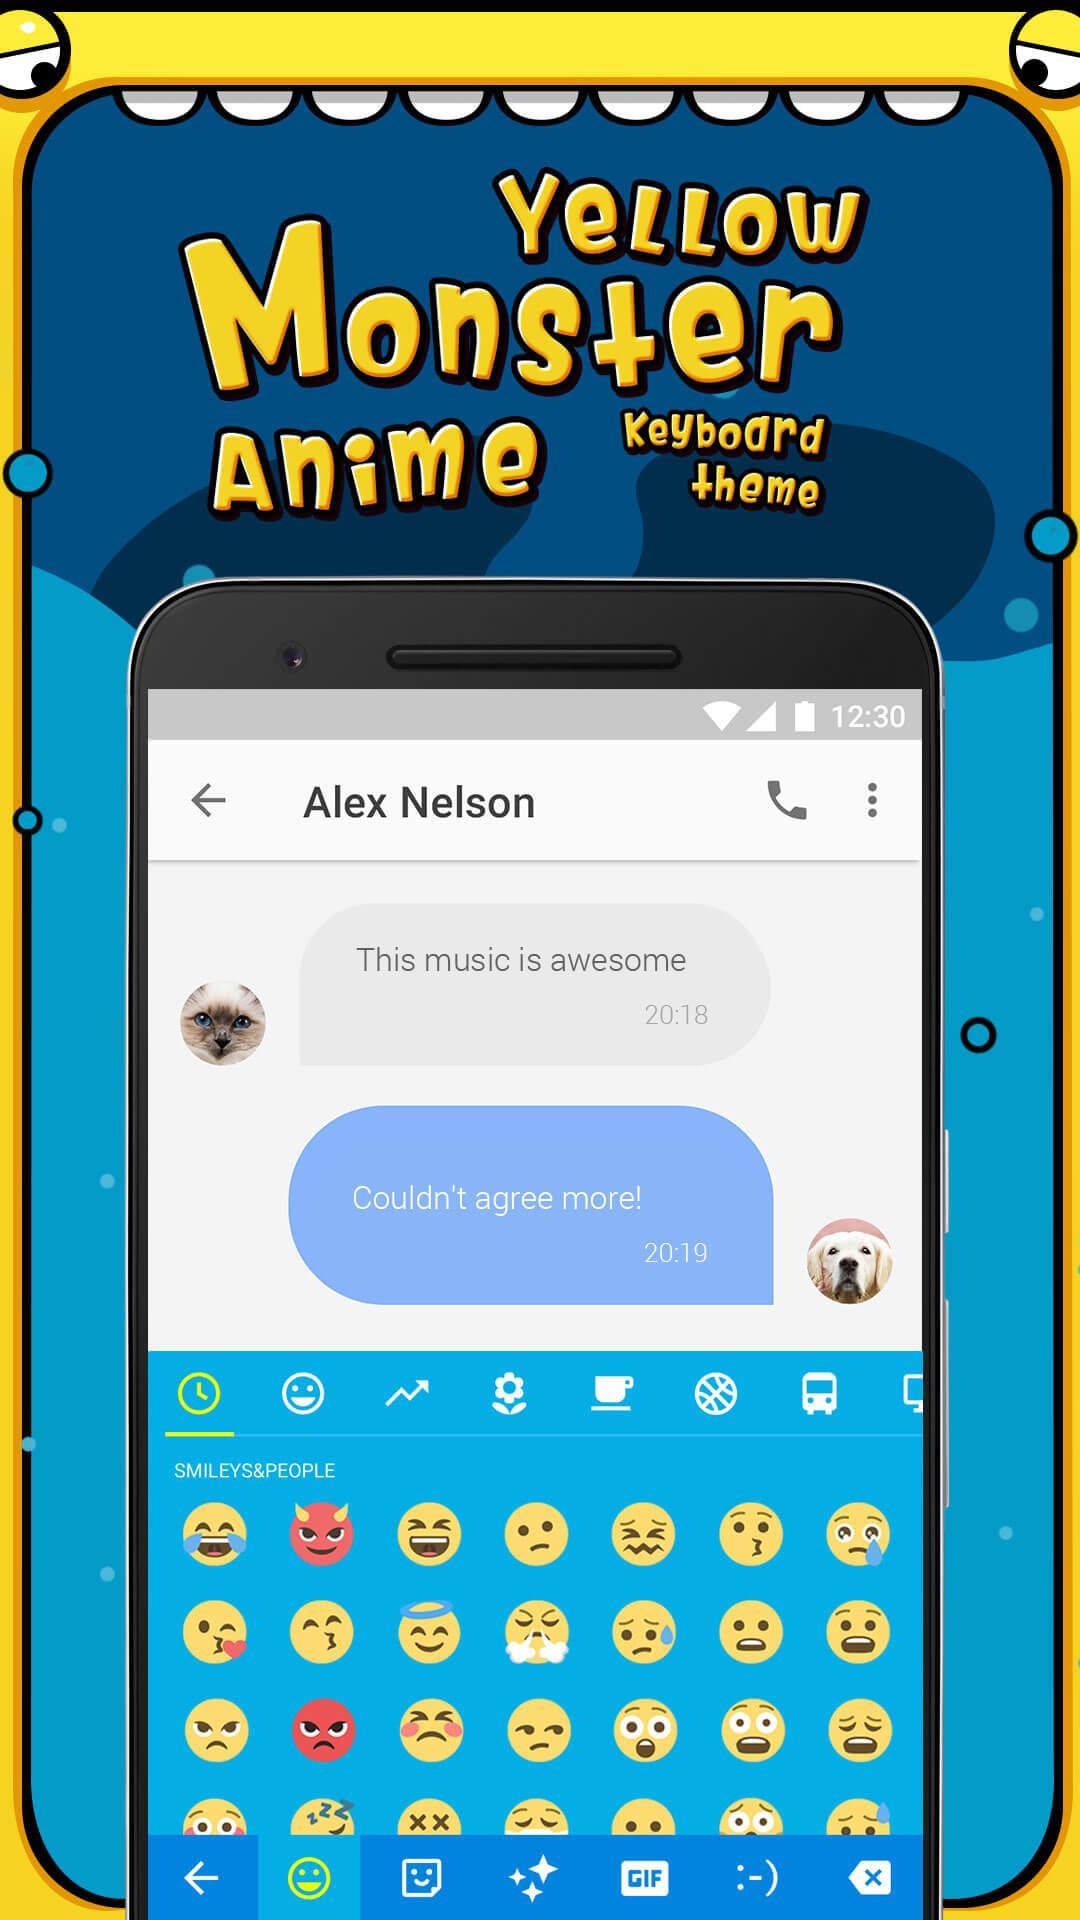 Yellow Monster Anime Emoji Keyboard Theme For Android Apk Download Enjoy no ads and more customization options for you. apkpure com